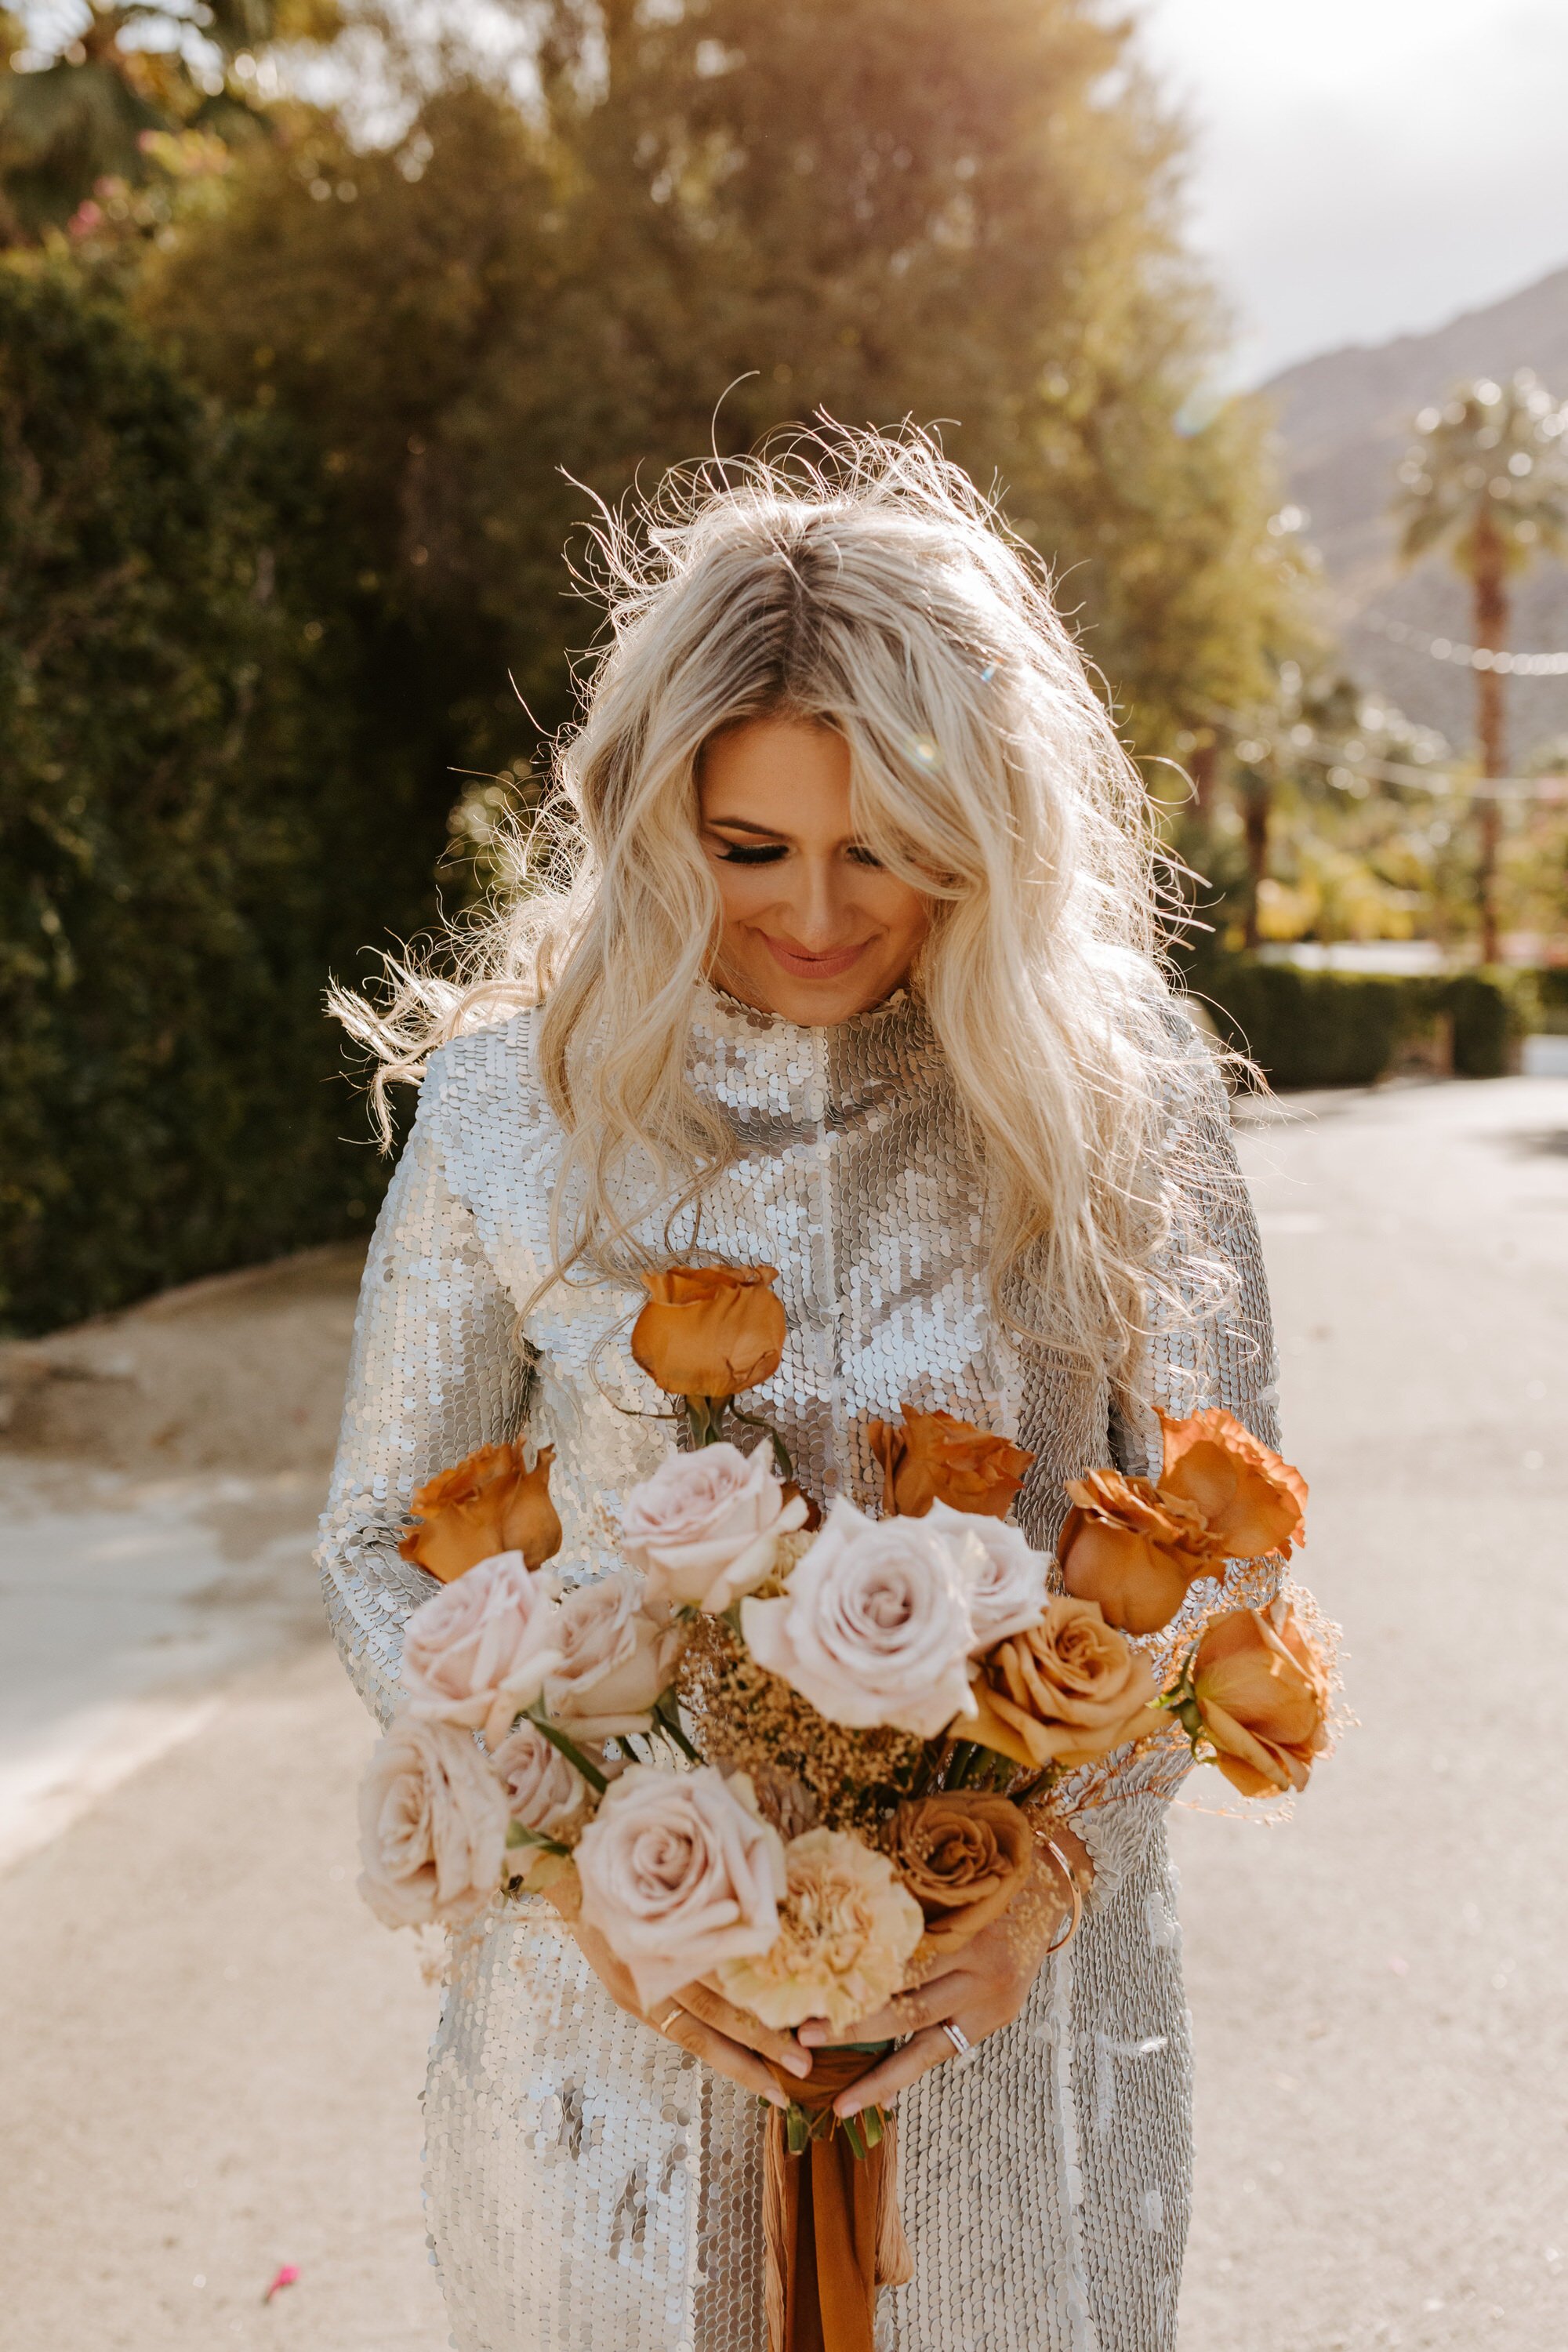 Palm Springs elopement | Silver sequin wedding dress | Neutral ombre bouquet with rust ribbon | Palm Springs Wedding Photographer | Tida Svy | www.tidasvy.com